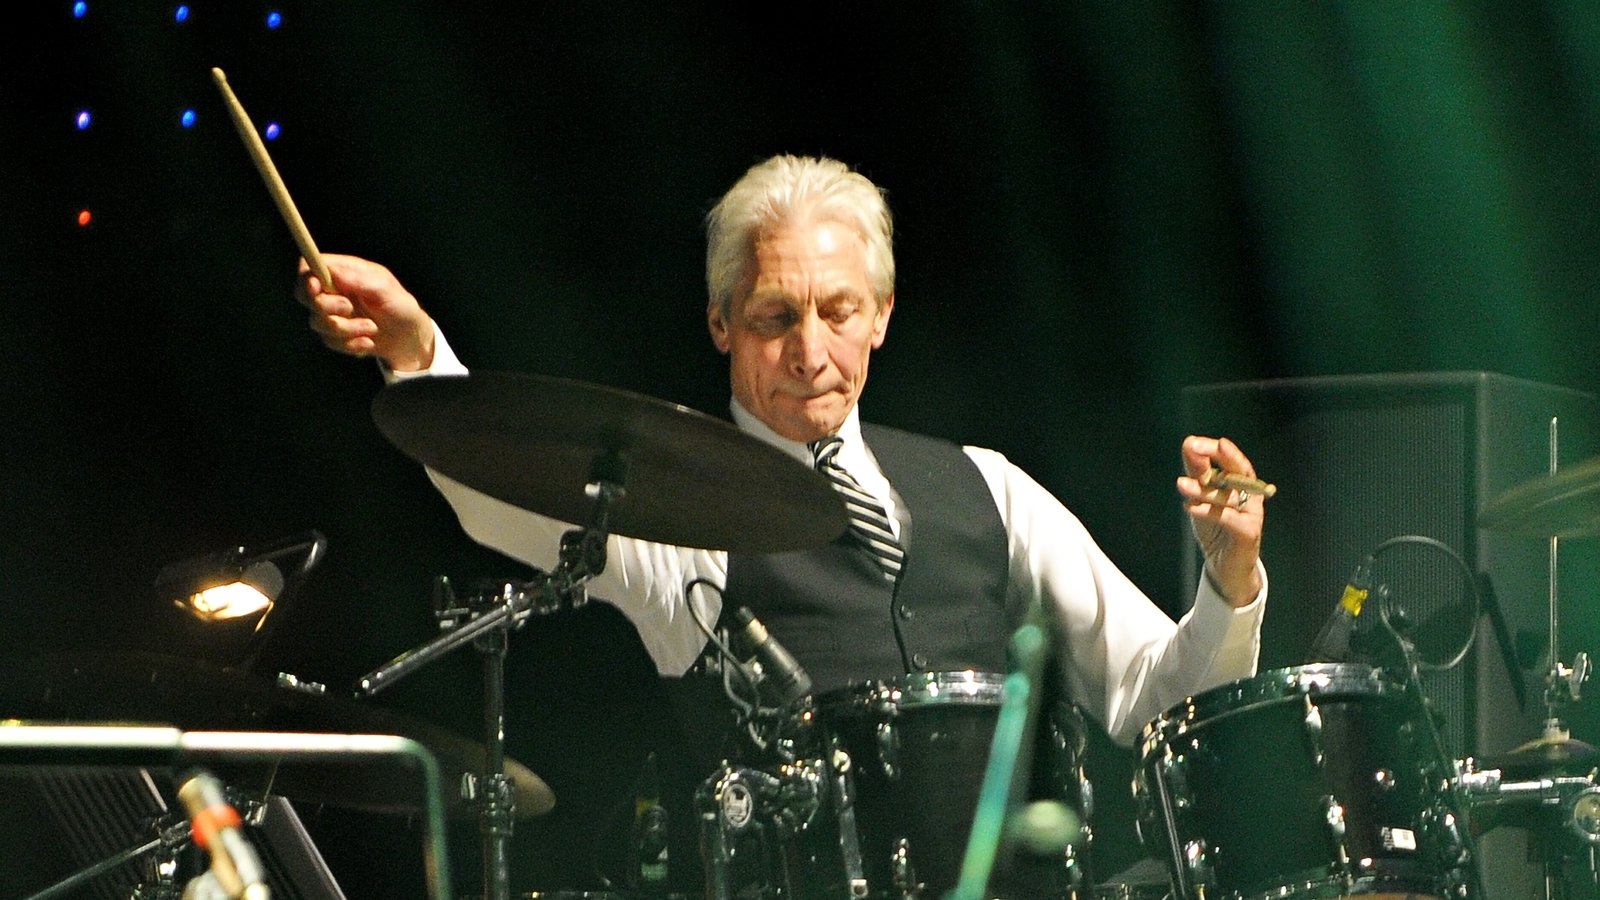 Rolling Stones on drummer Charlie Watts and the No Filter tour - Los  Angeles Times